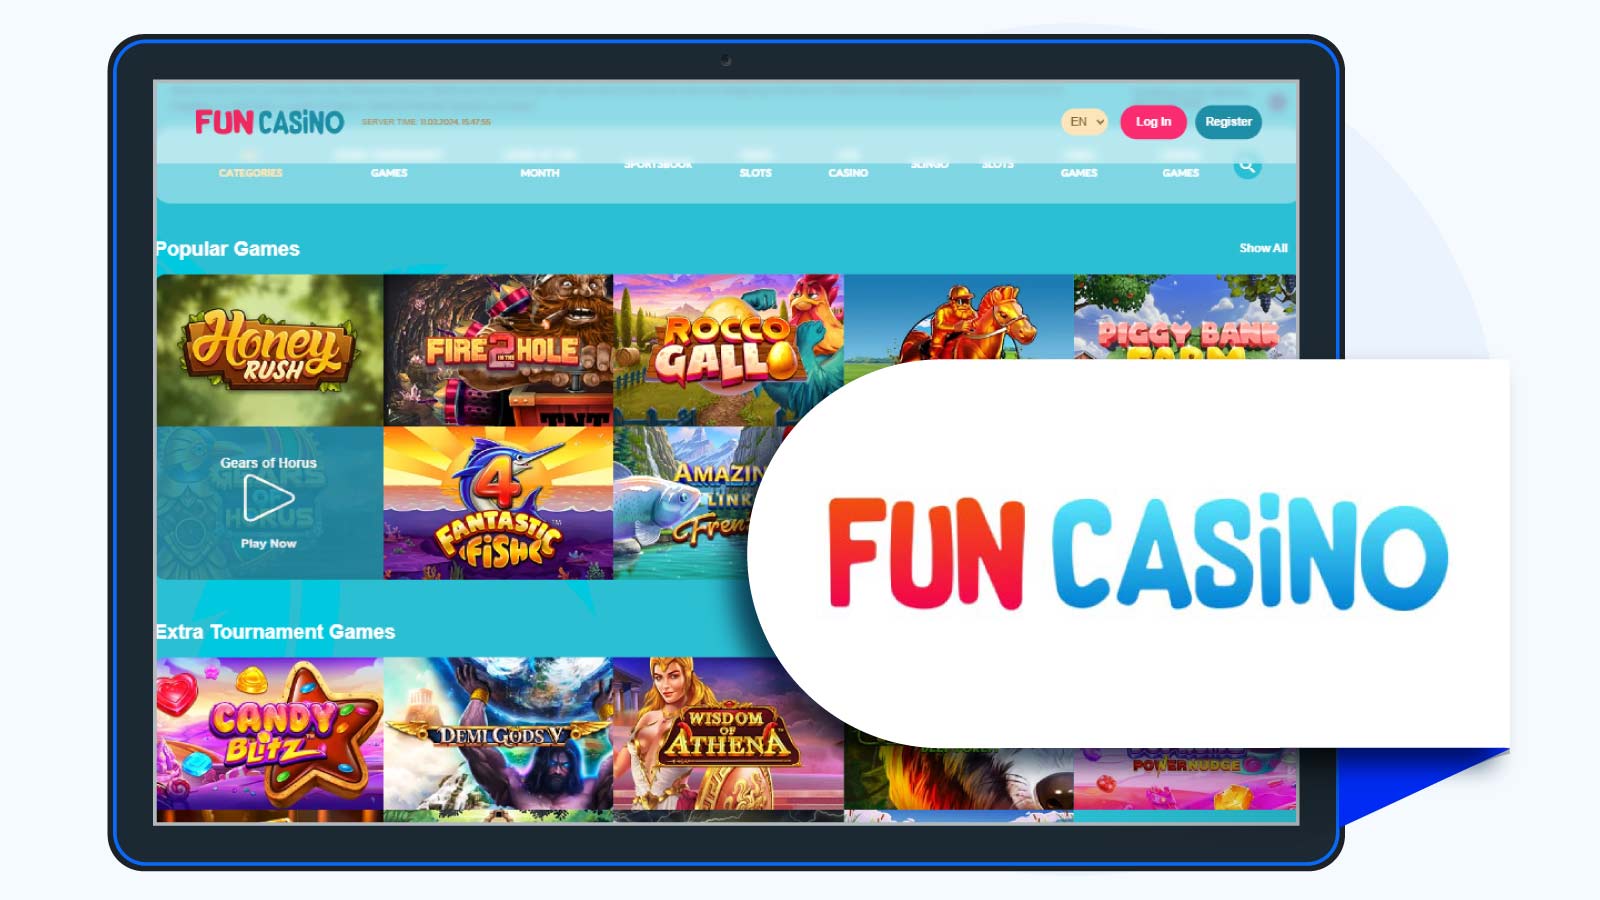 10-Free-Spins-With-No-Deposit-at-Fun-Casino